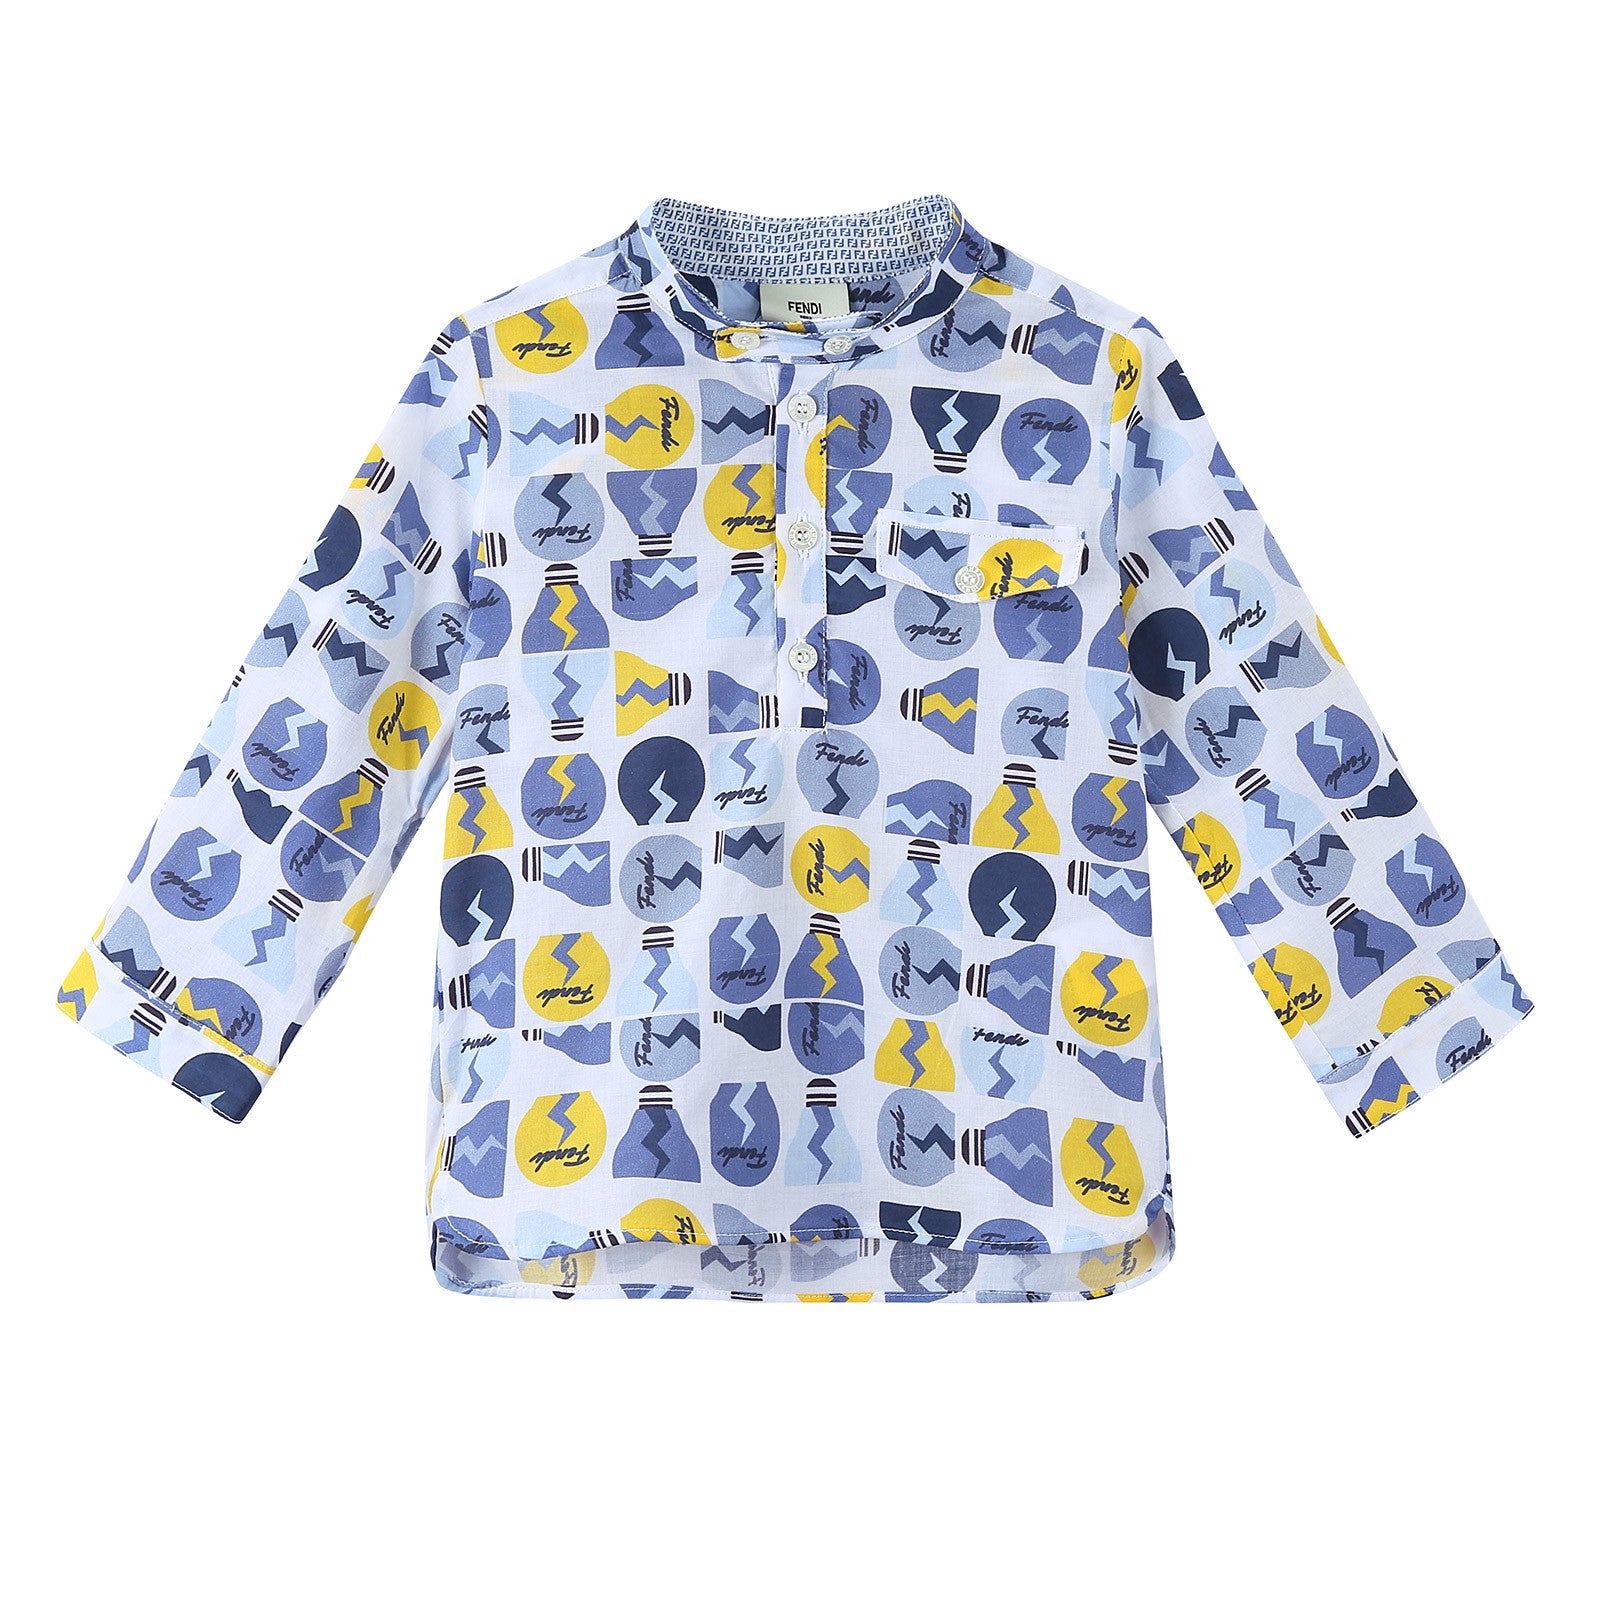 Baby Boys Multicolor All Over Printed Cotton Shirt - CÉMAROSE | Children's Fashion Store - 1